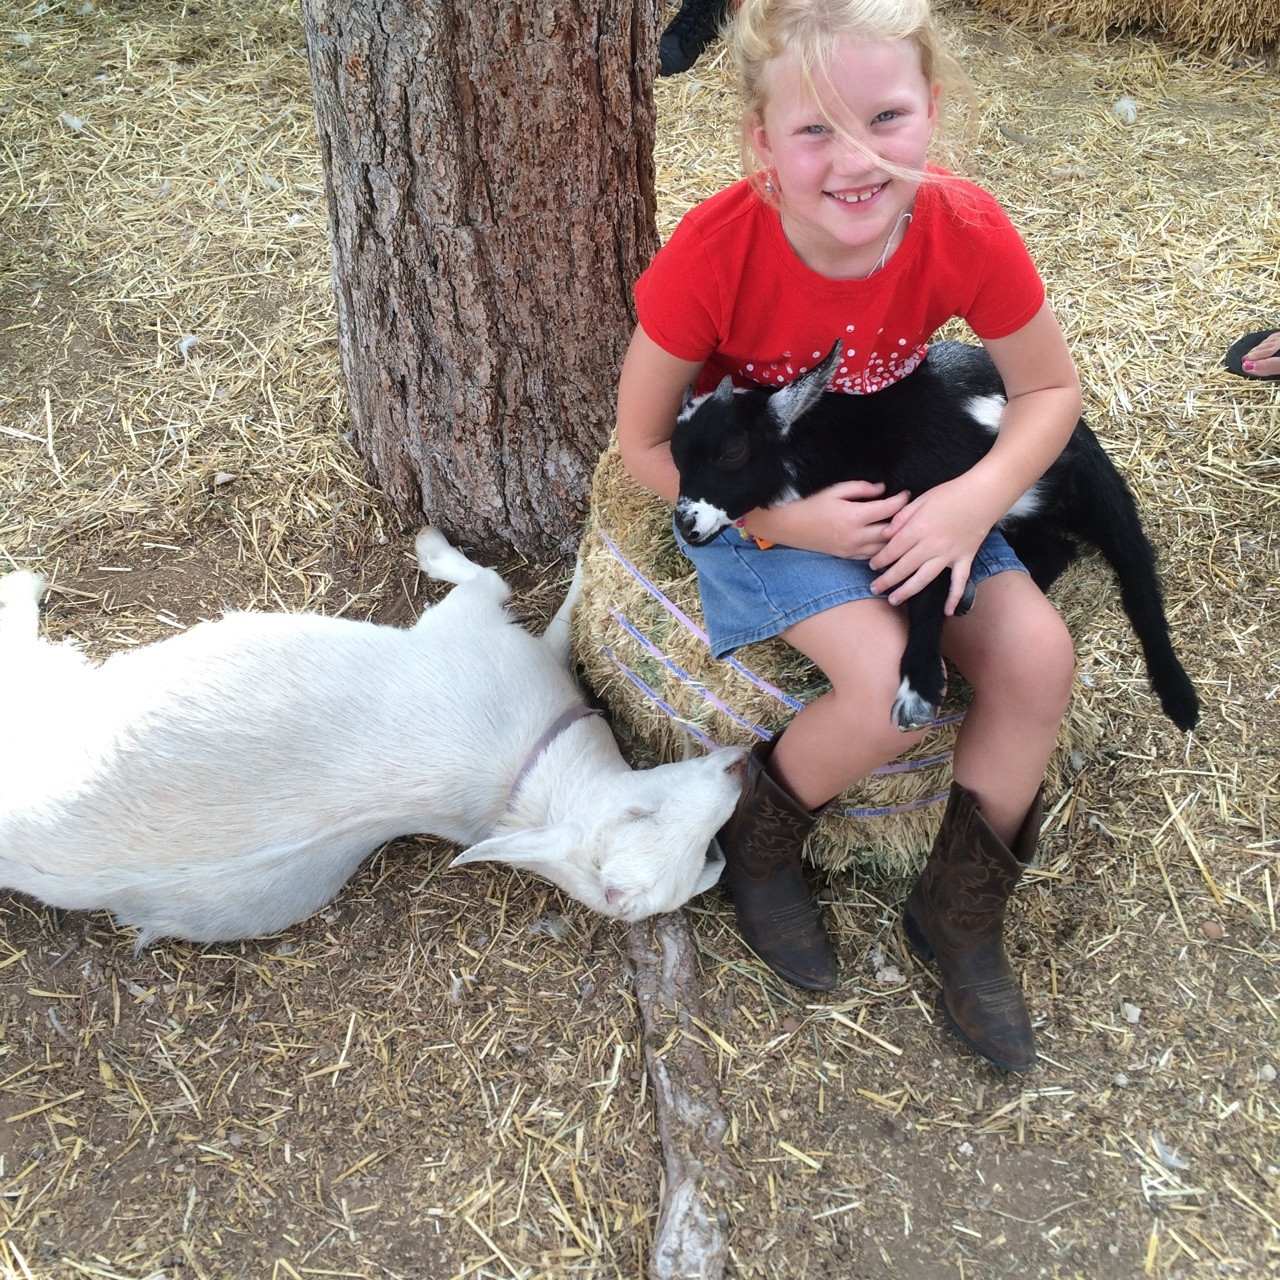 Petting Zoo Rental For Birthday Party
 Pony Party Time – Pony Rides and Petting Zoo for Birthday